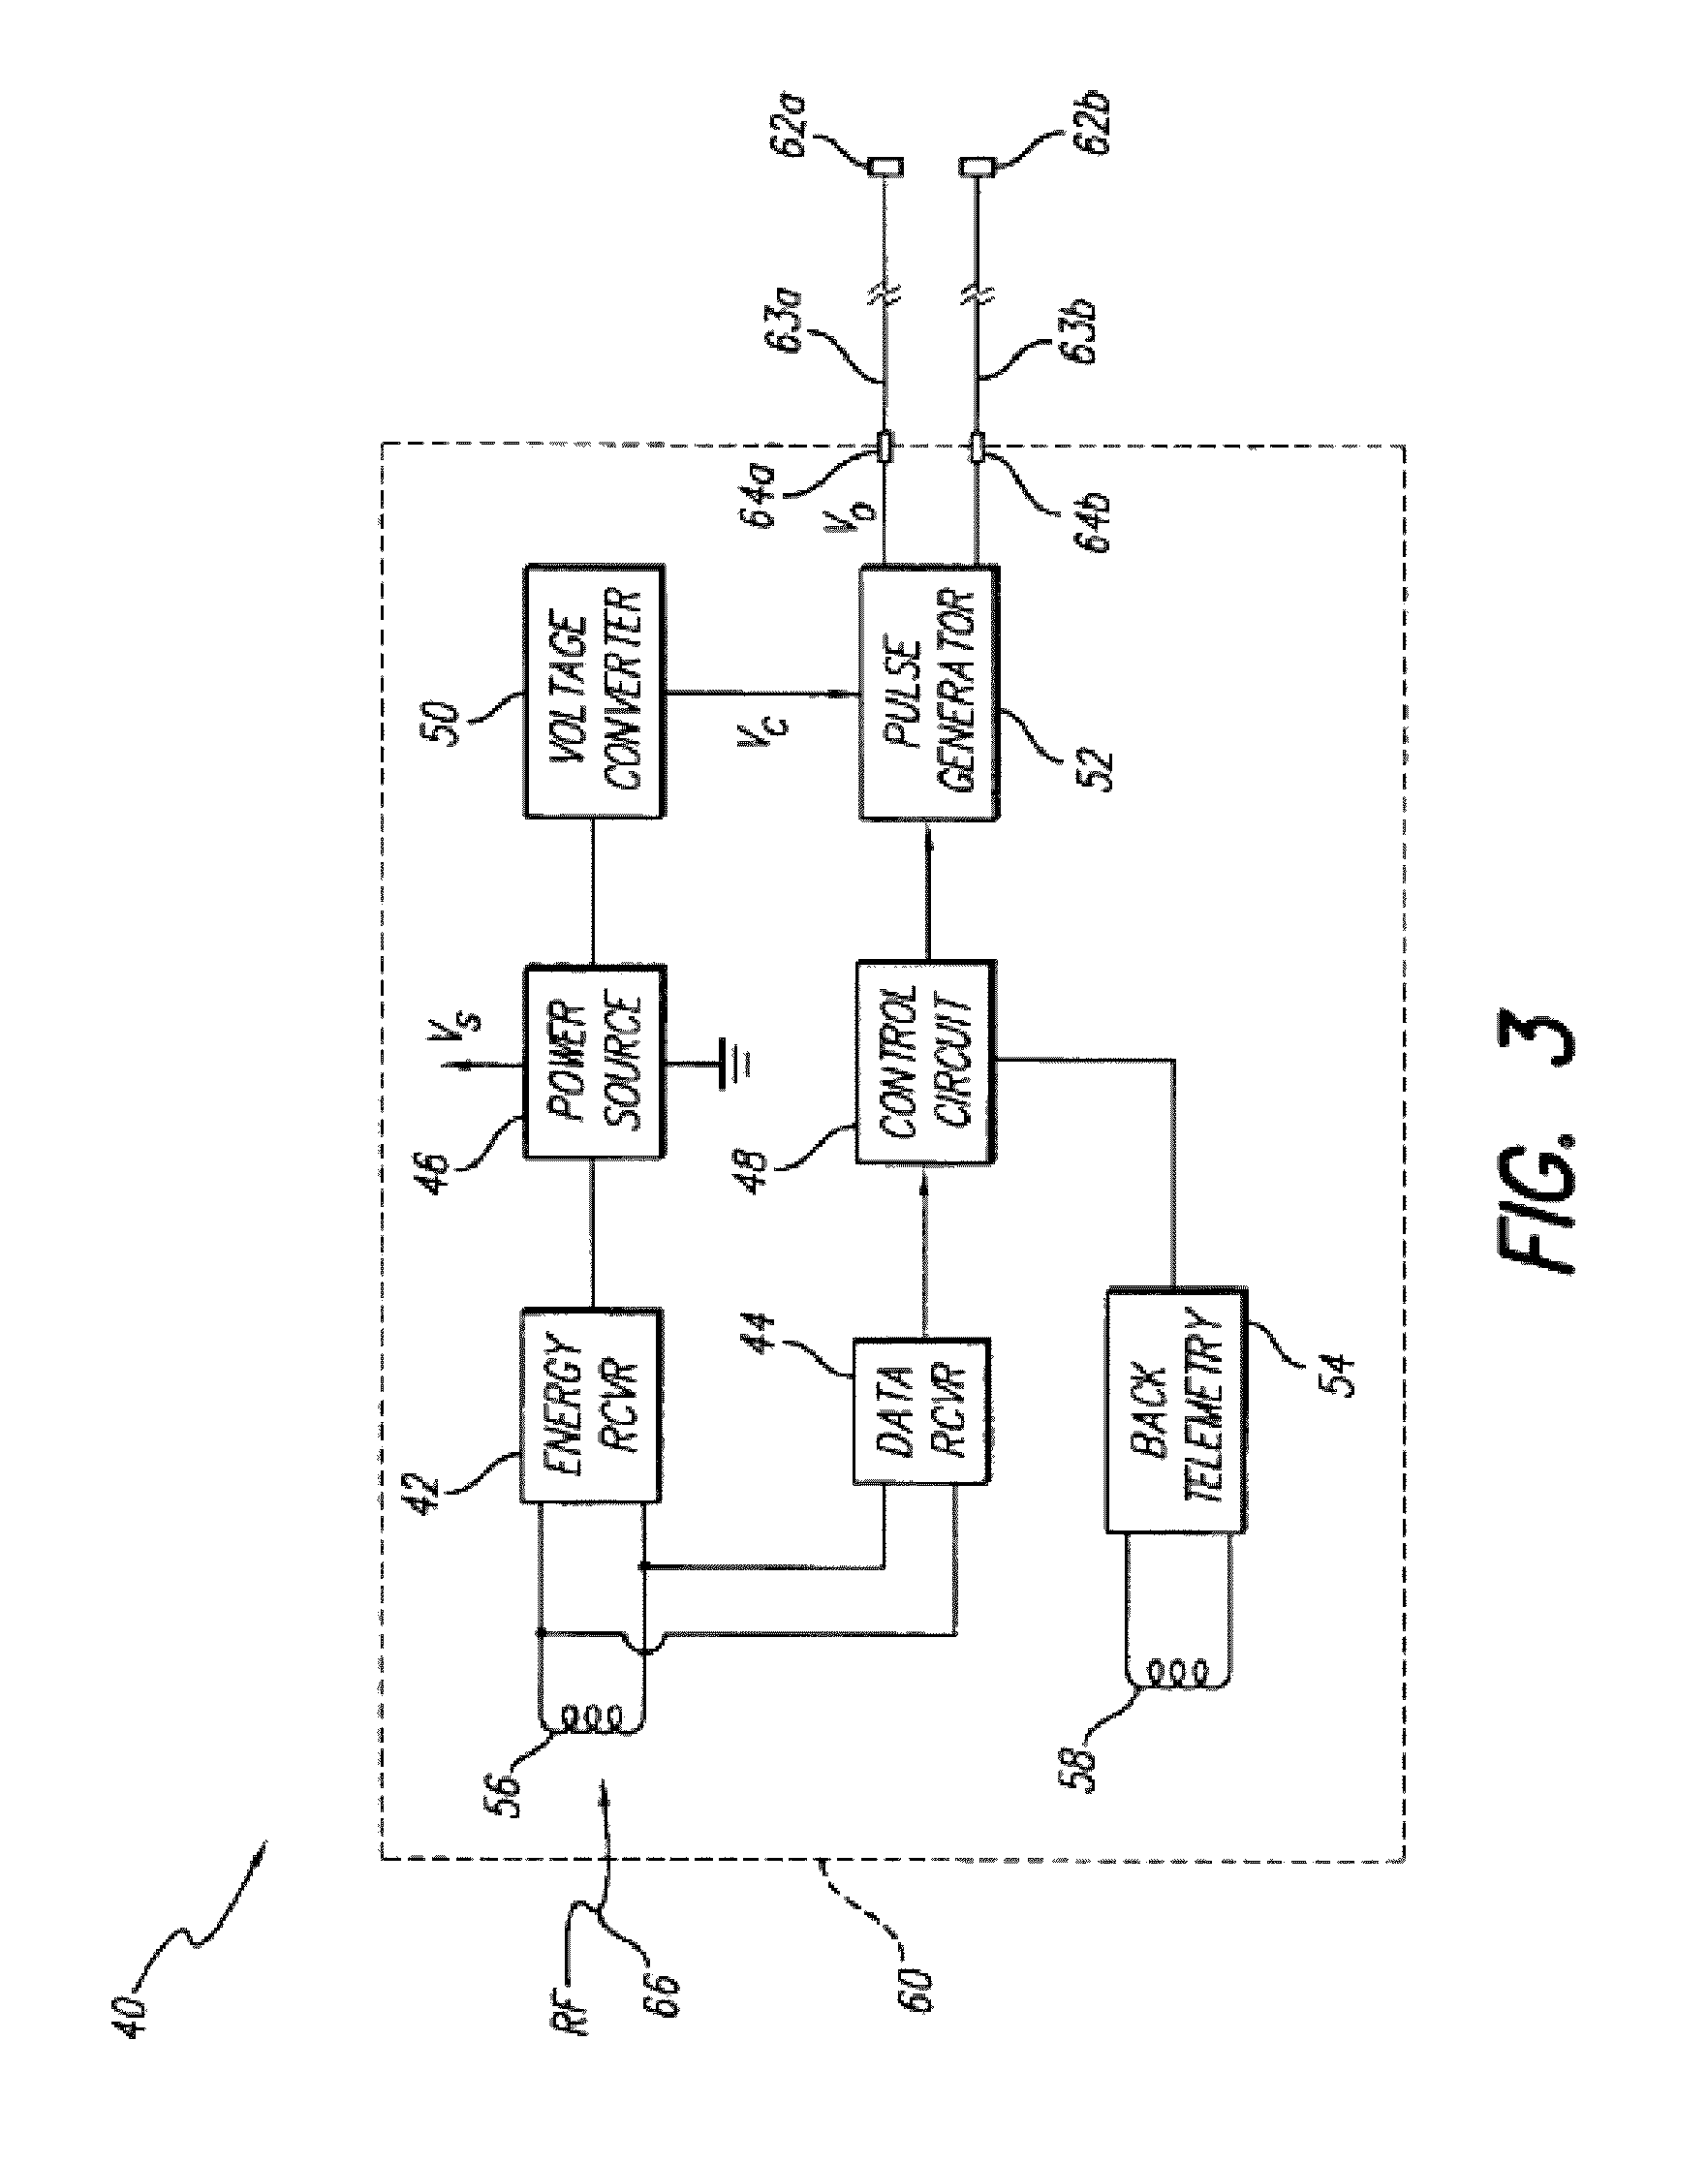 Implantable medical device with single coil for charging and communicating